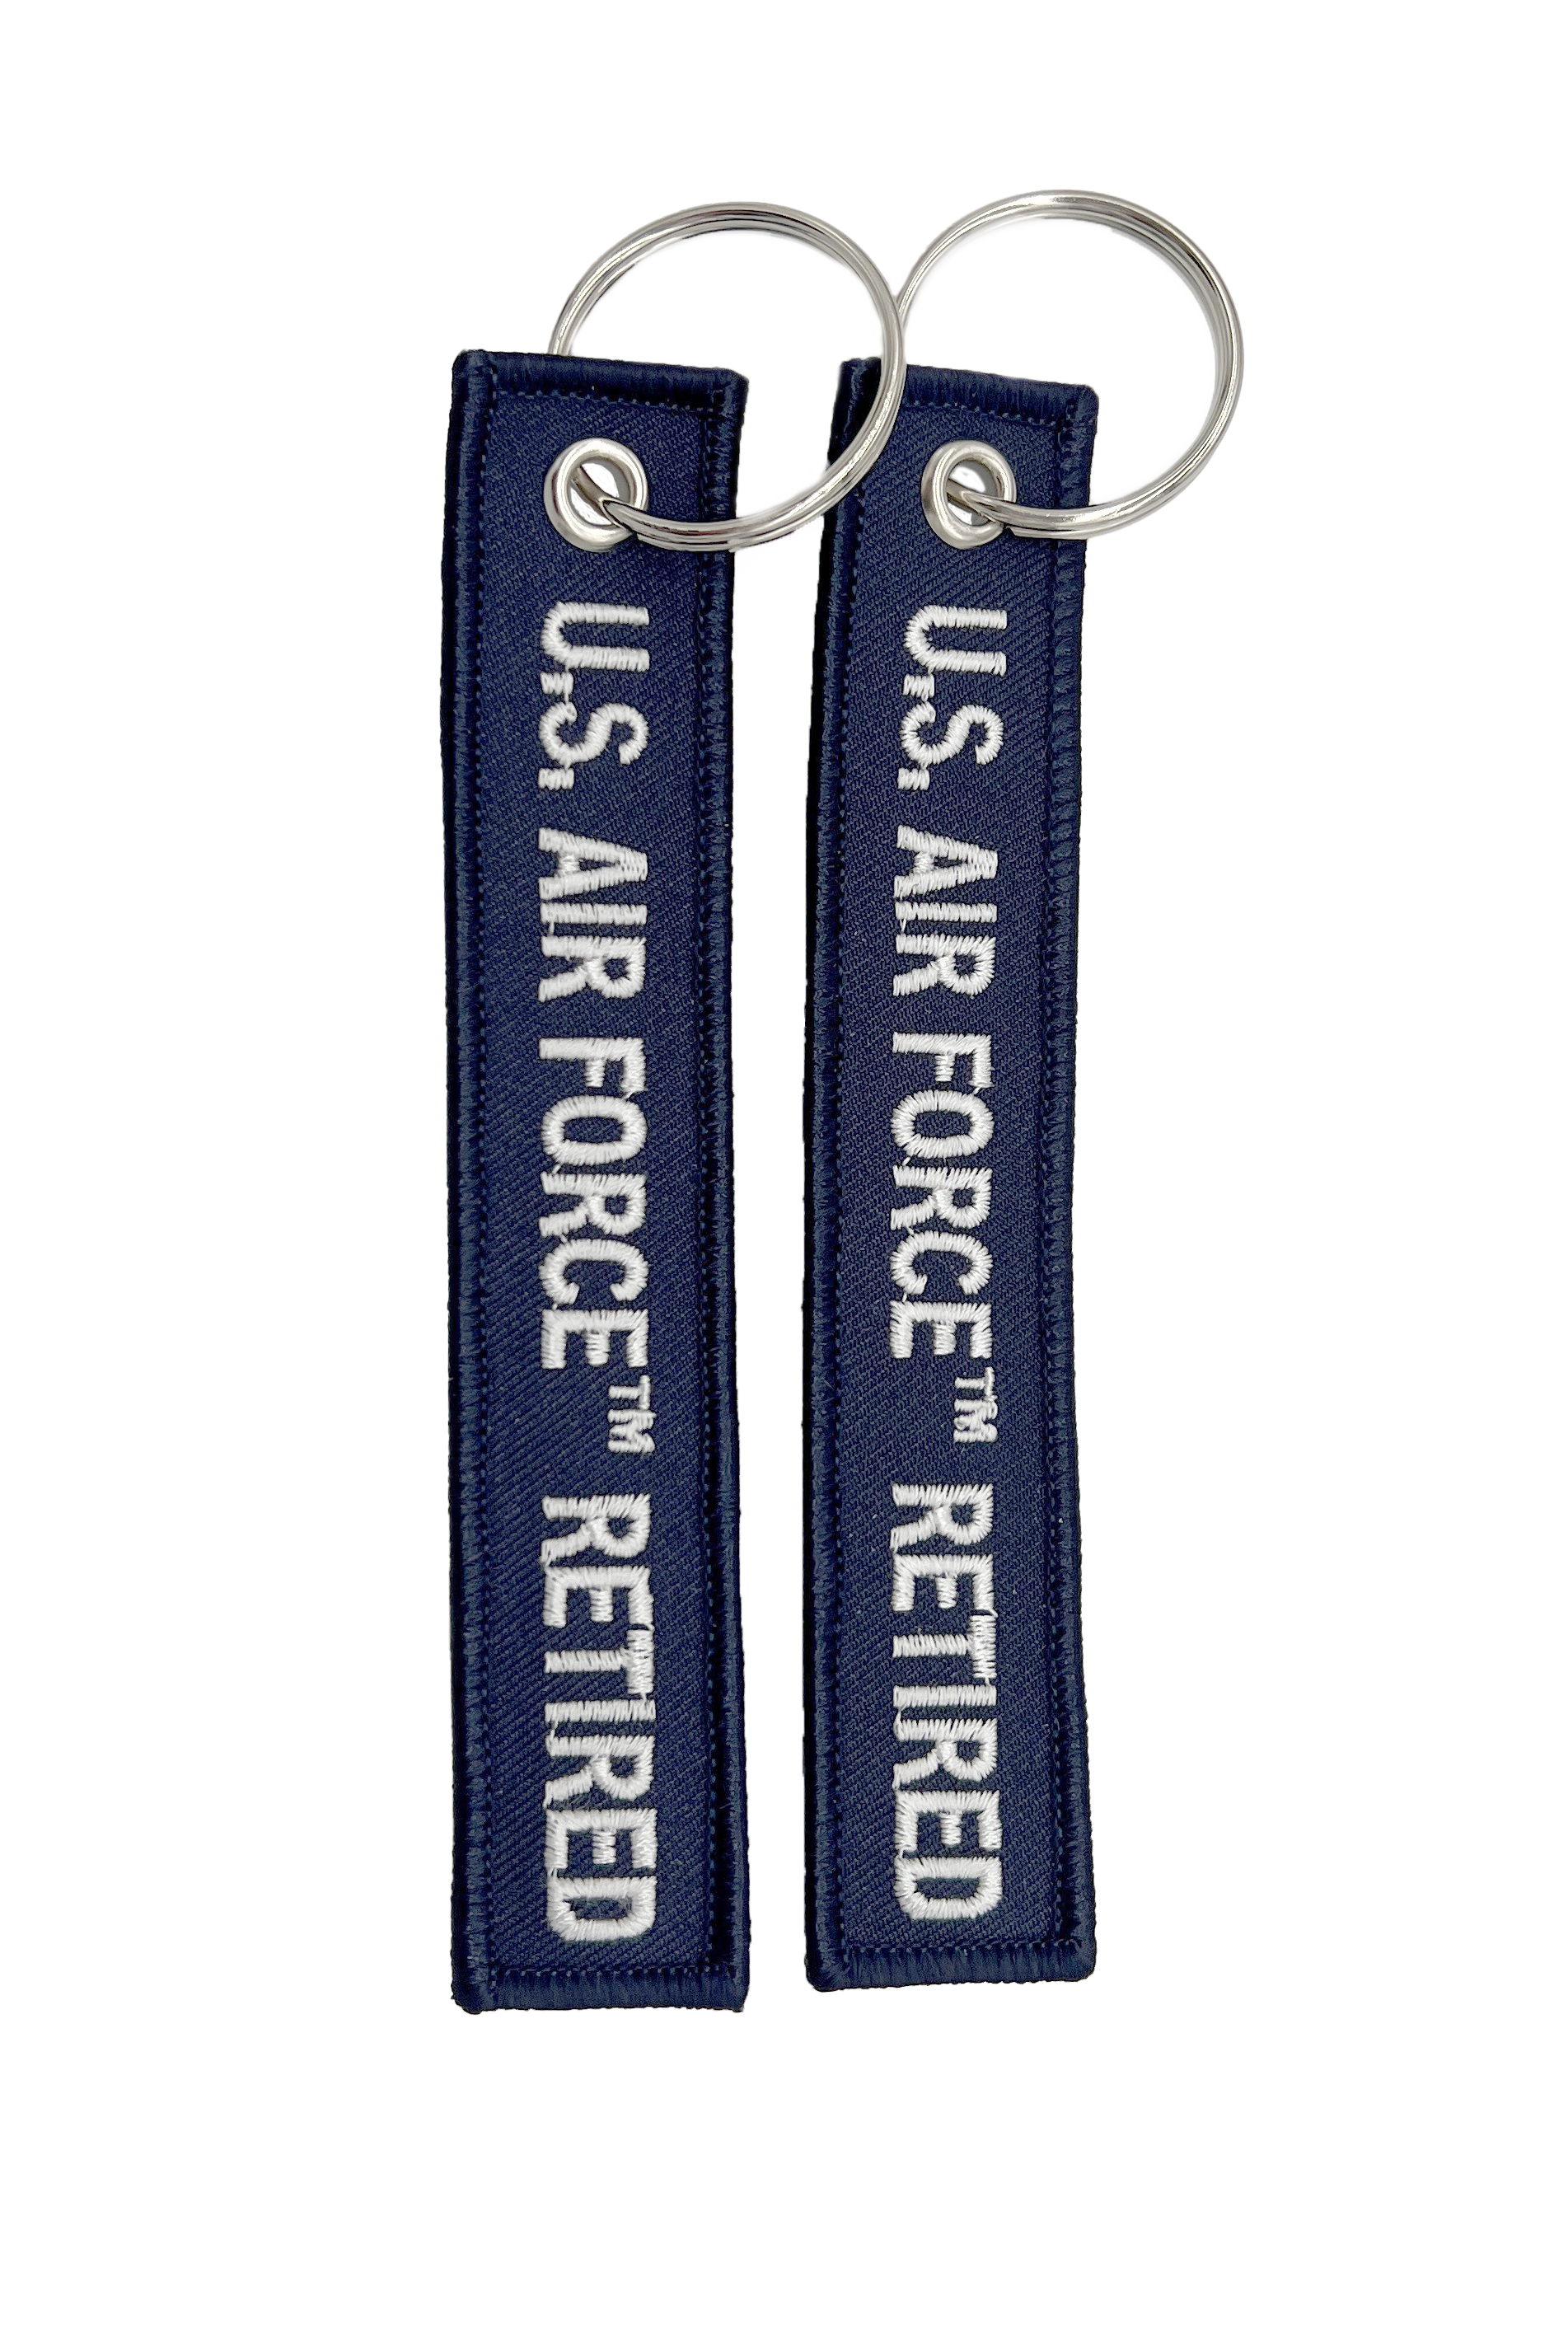 KEYCHAIN-AIR FORCE RETIRED